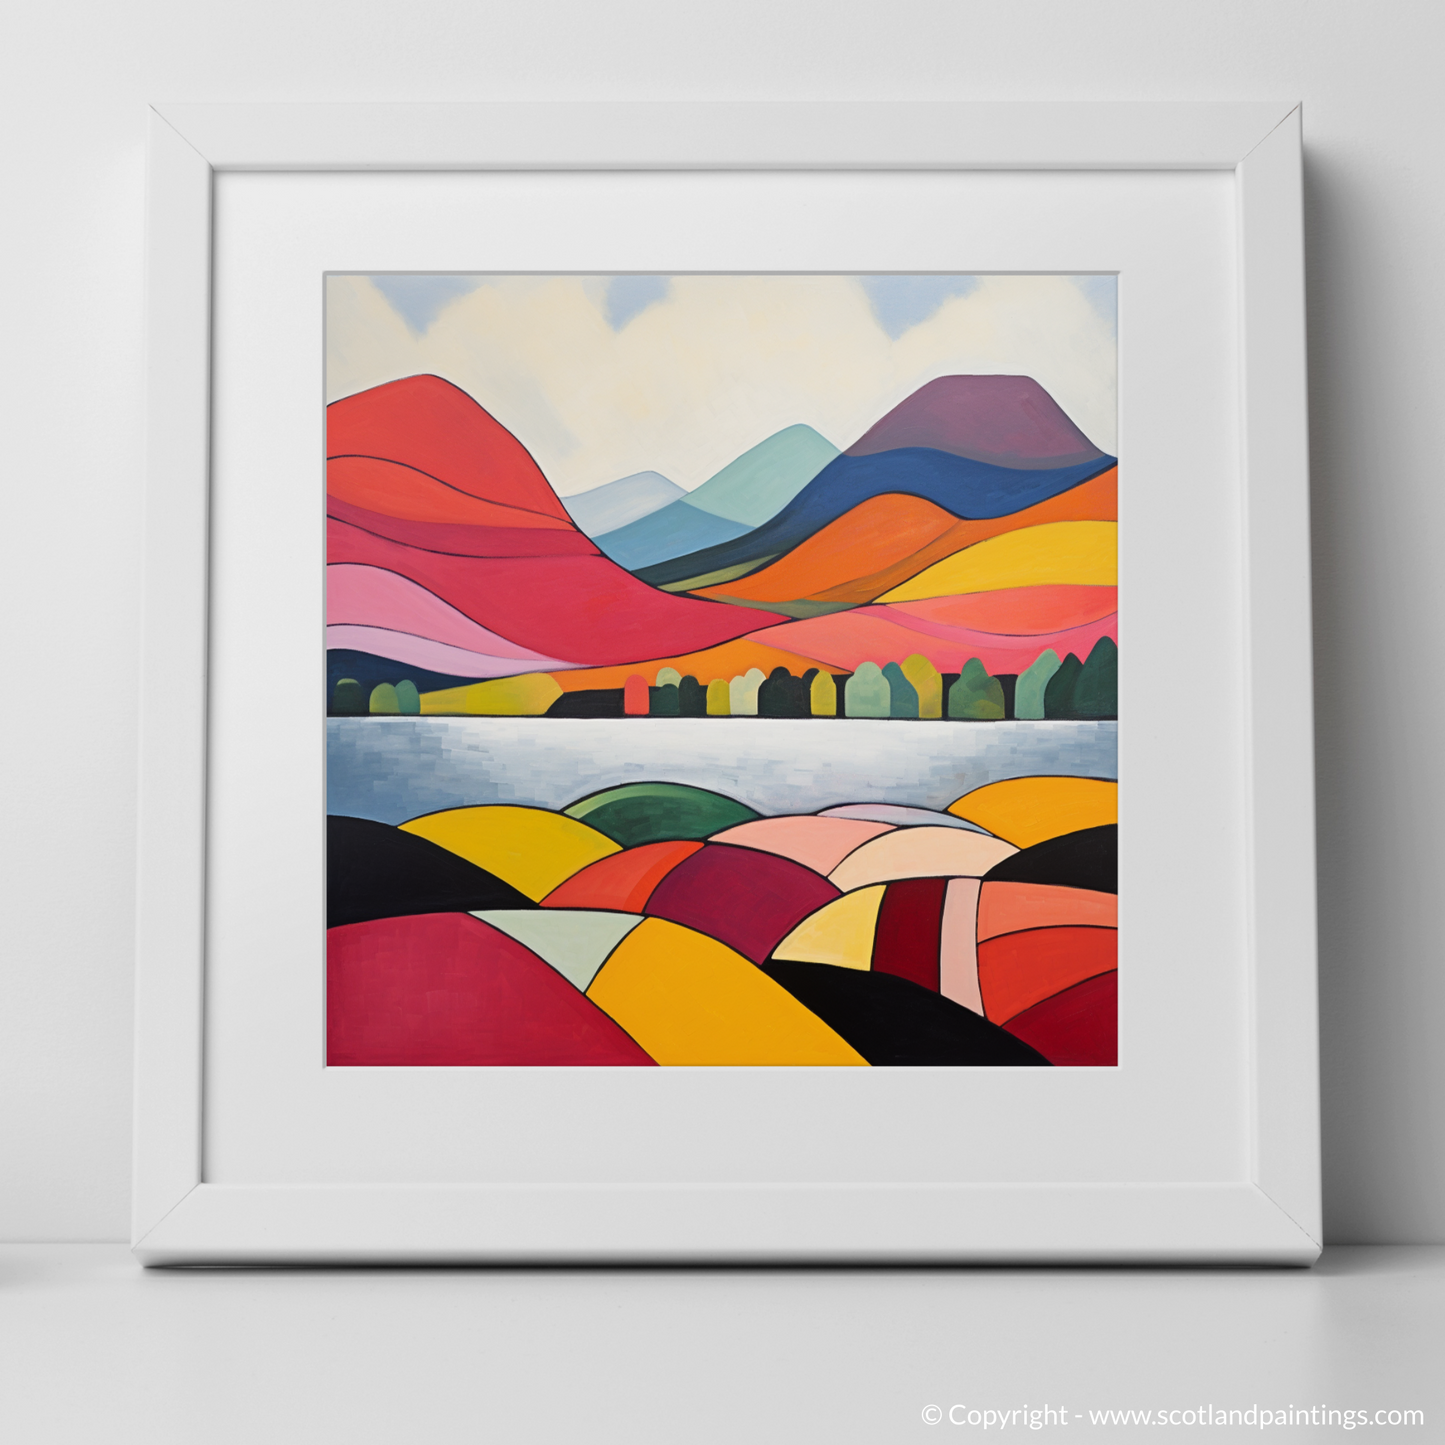 Art Print of Loch Lochy, Highlands in summer with a white frame